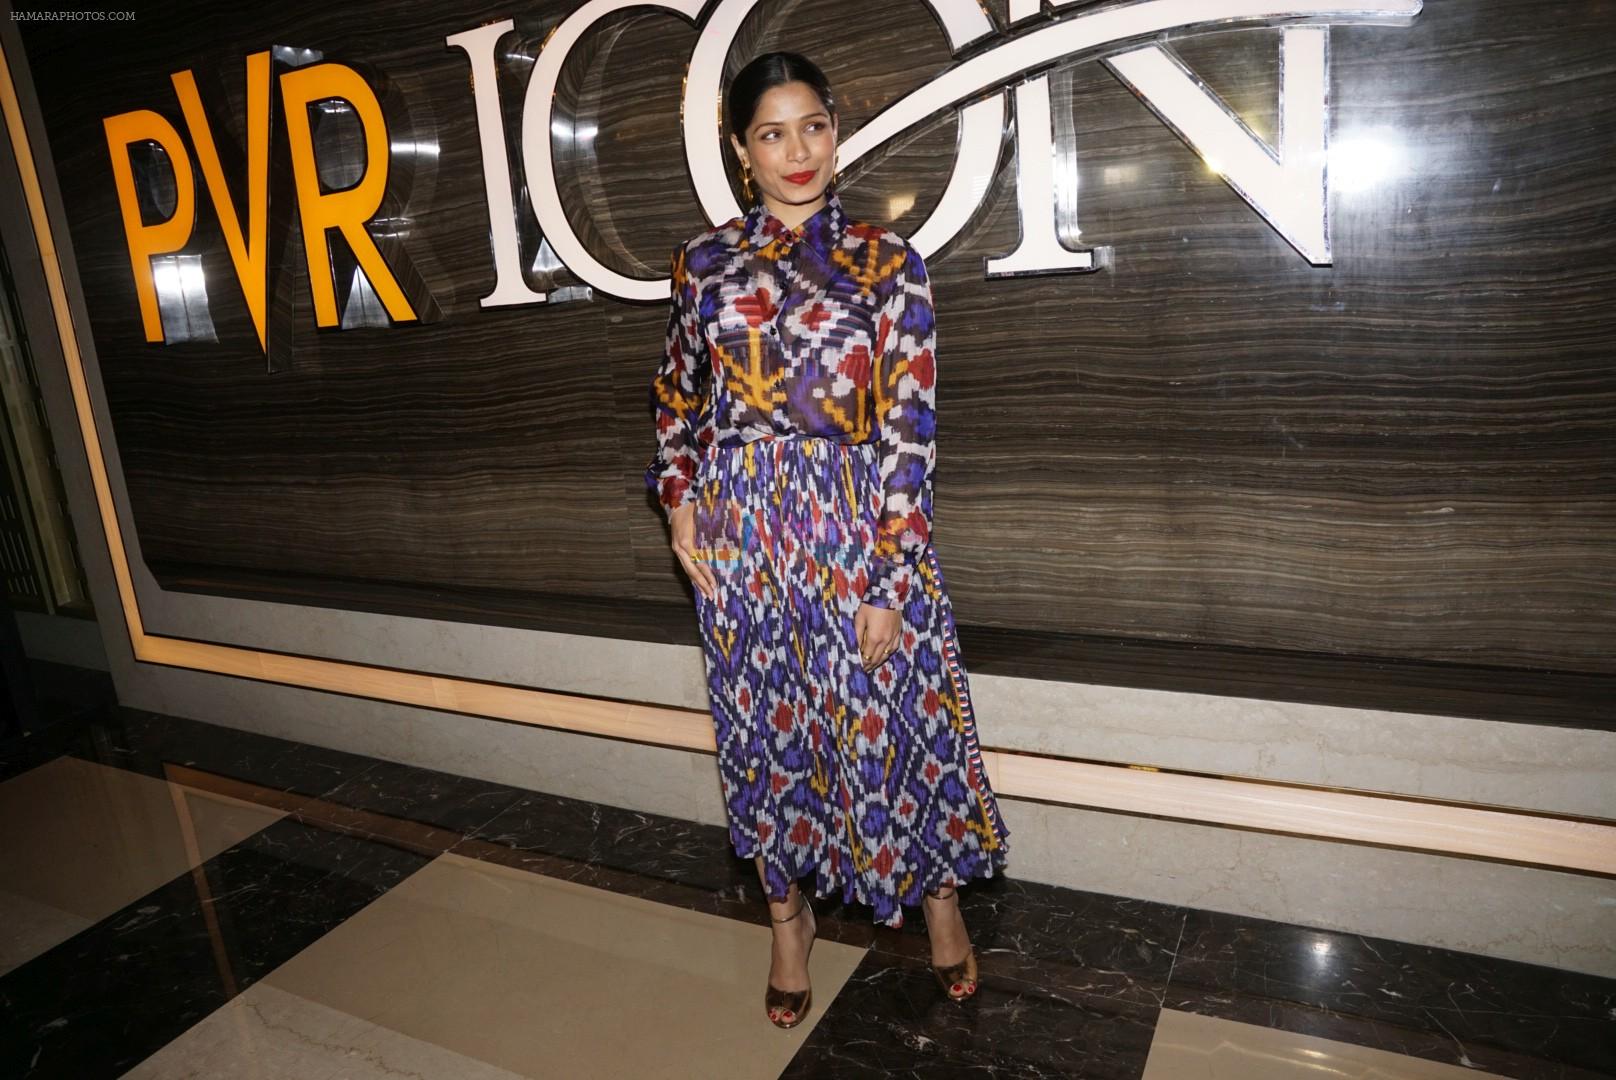 Freida Pinto at the Screening of Love Sonia in pvr icon andheri on 12th Sept 2018